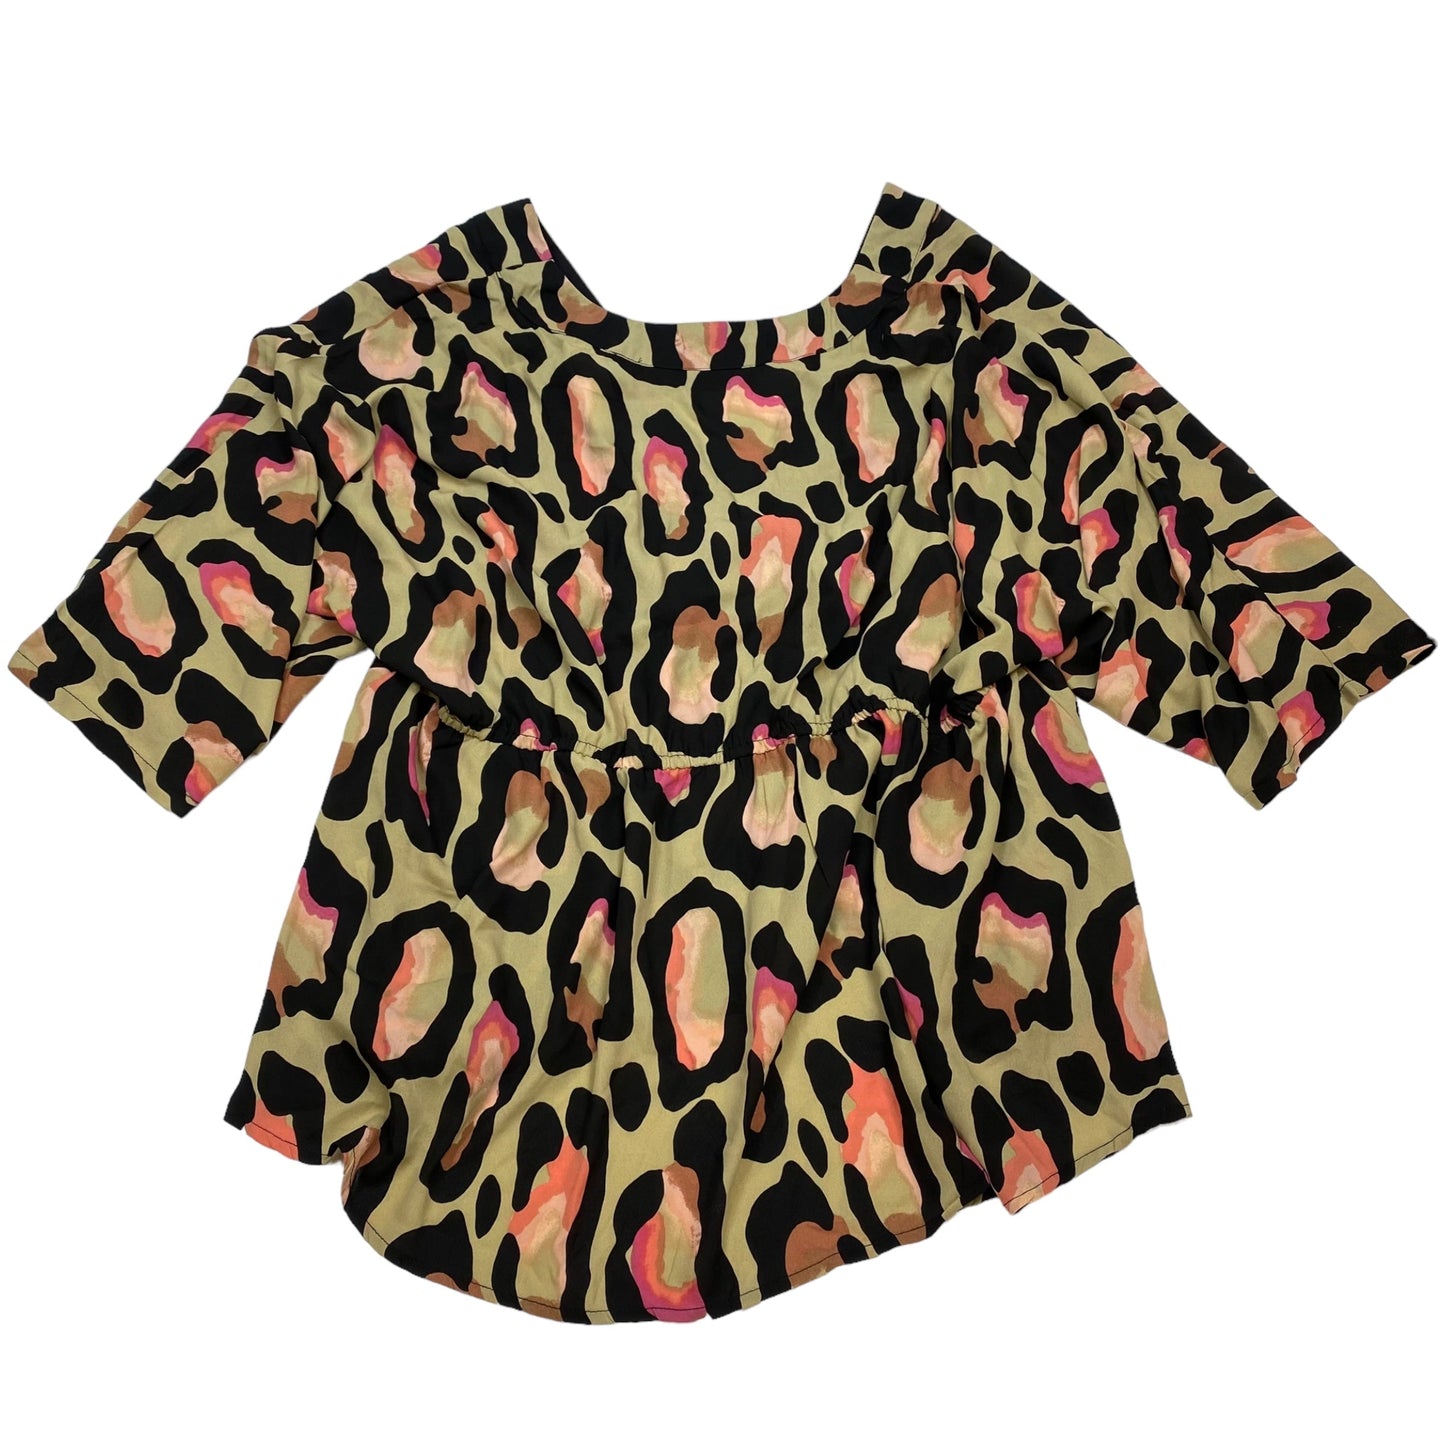 Animal Print Top Short Sleeve New York And Co, Size Xxl